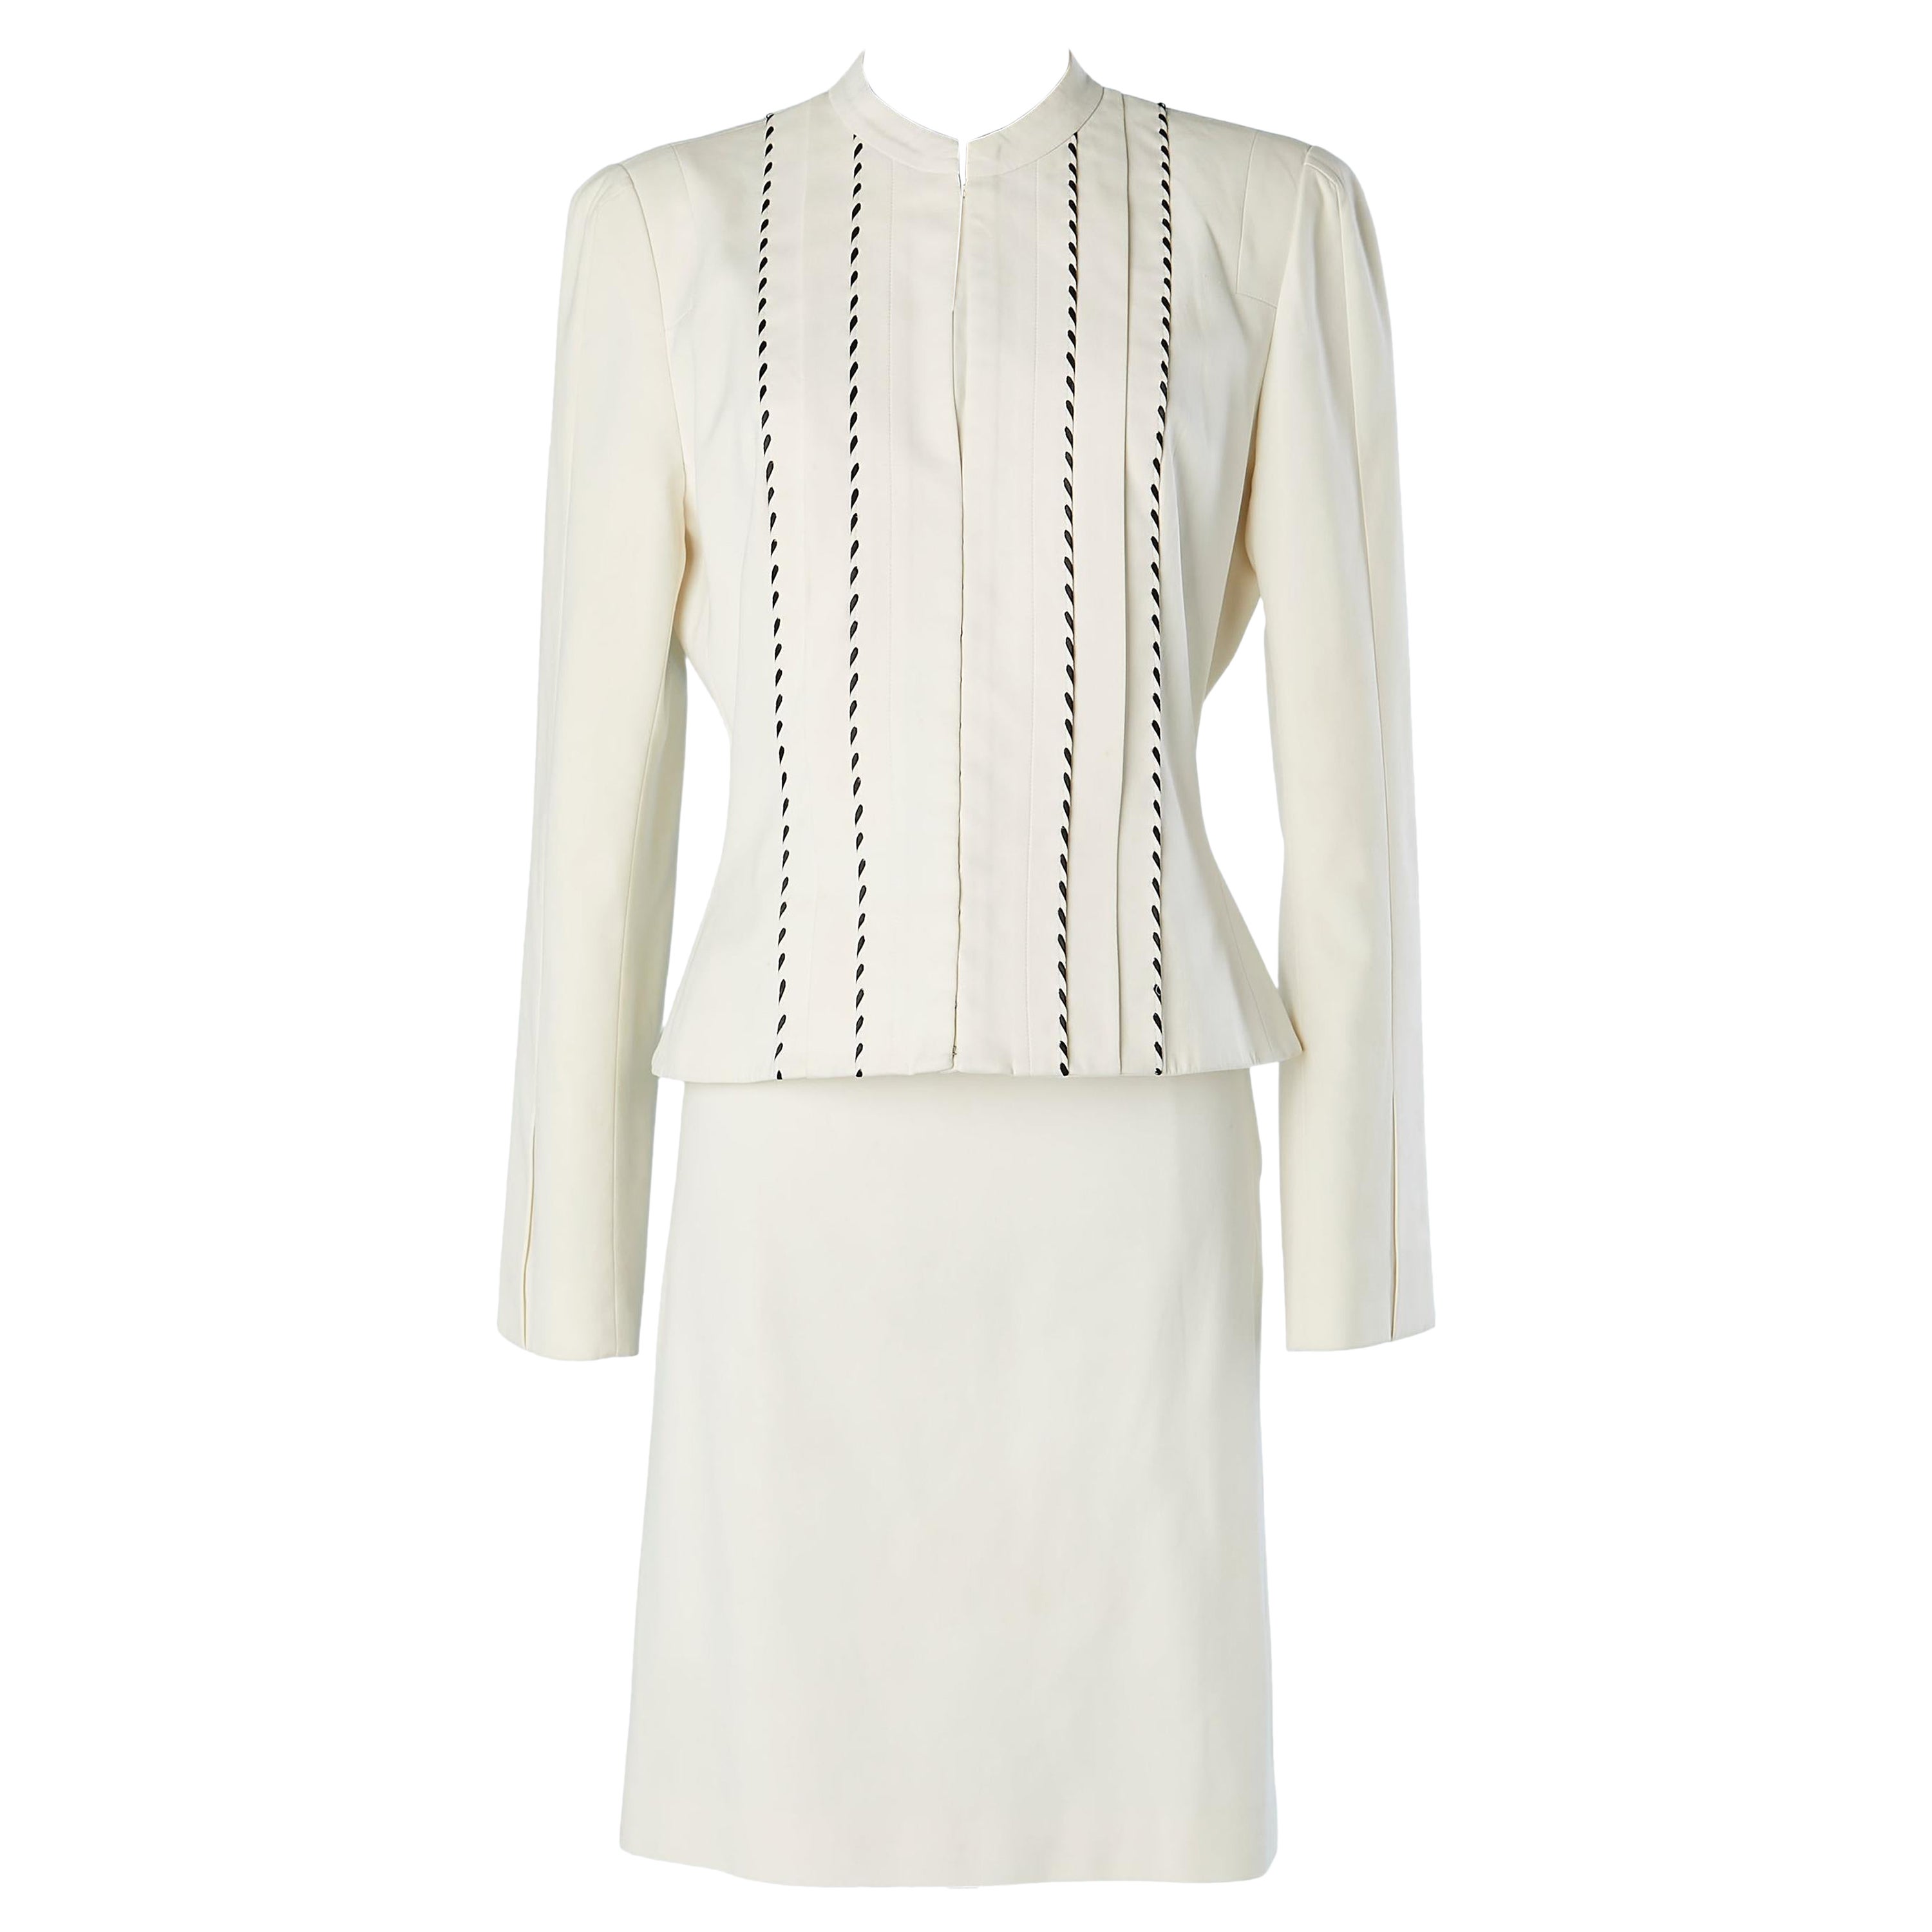 Off-white cotton skirt-suit with black Sellier stiching Thierry Mugler Couture  For Sale